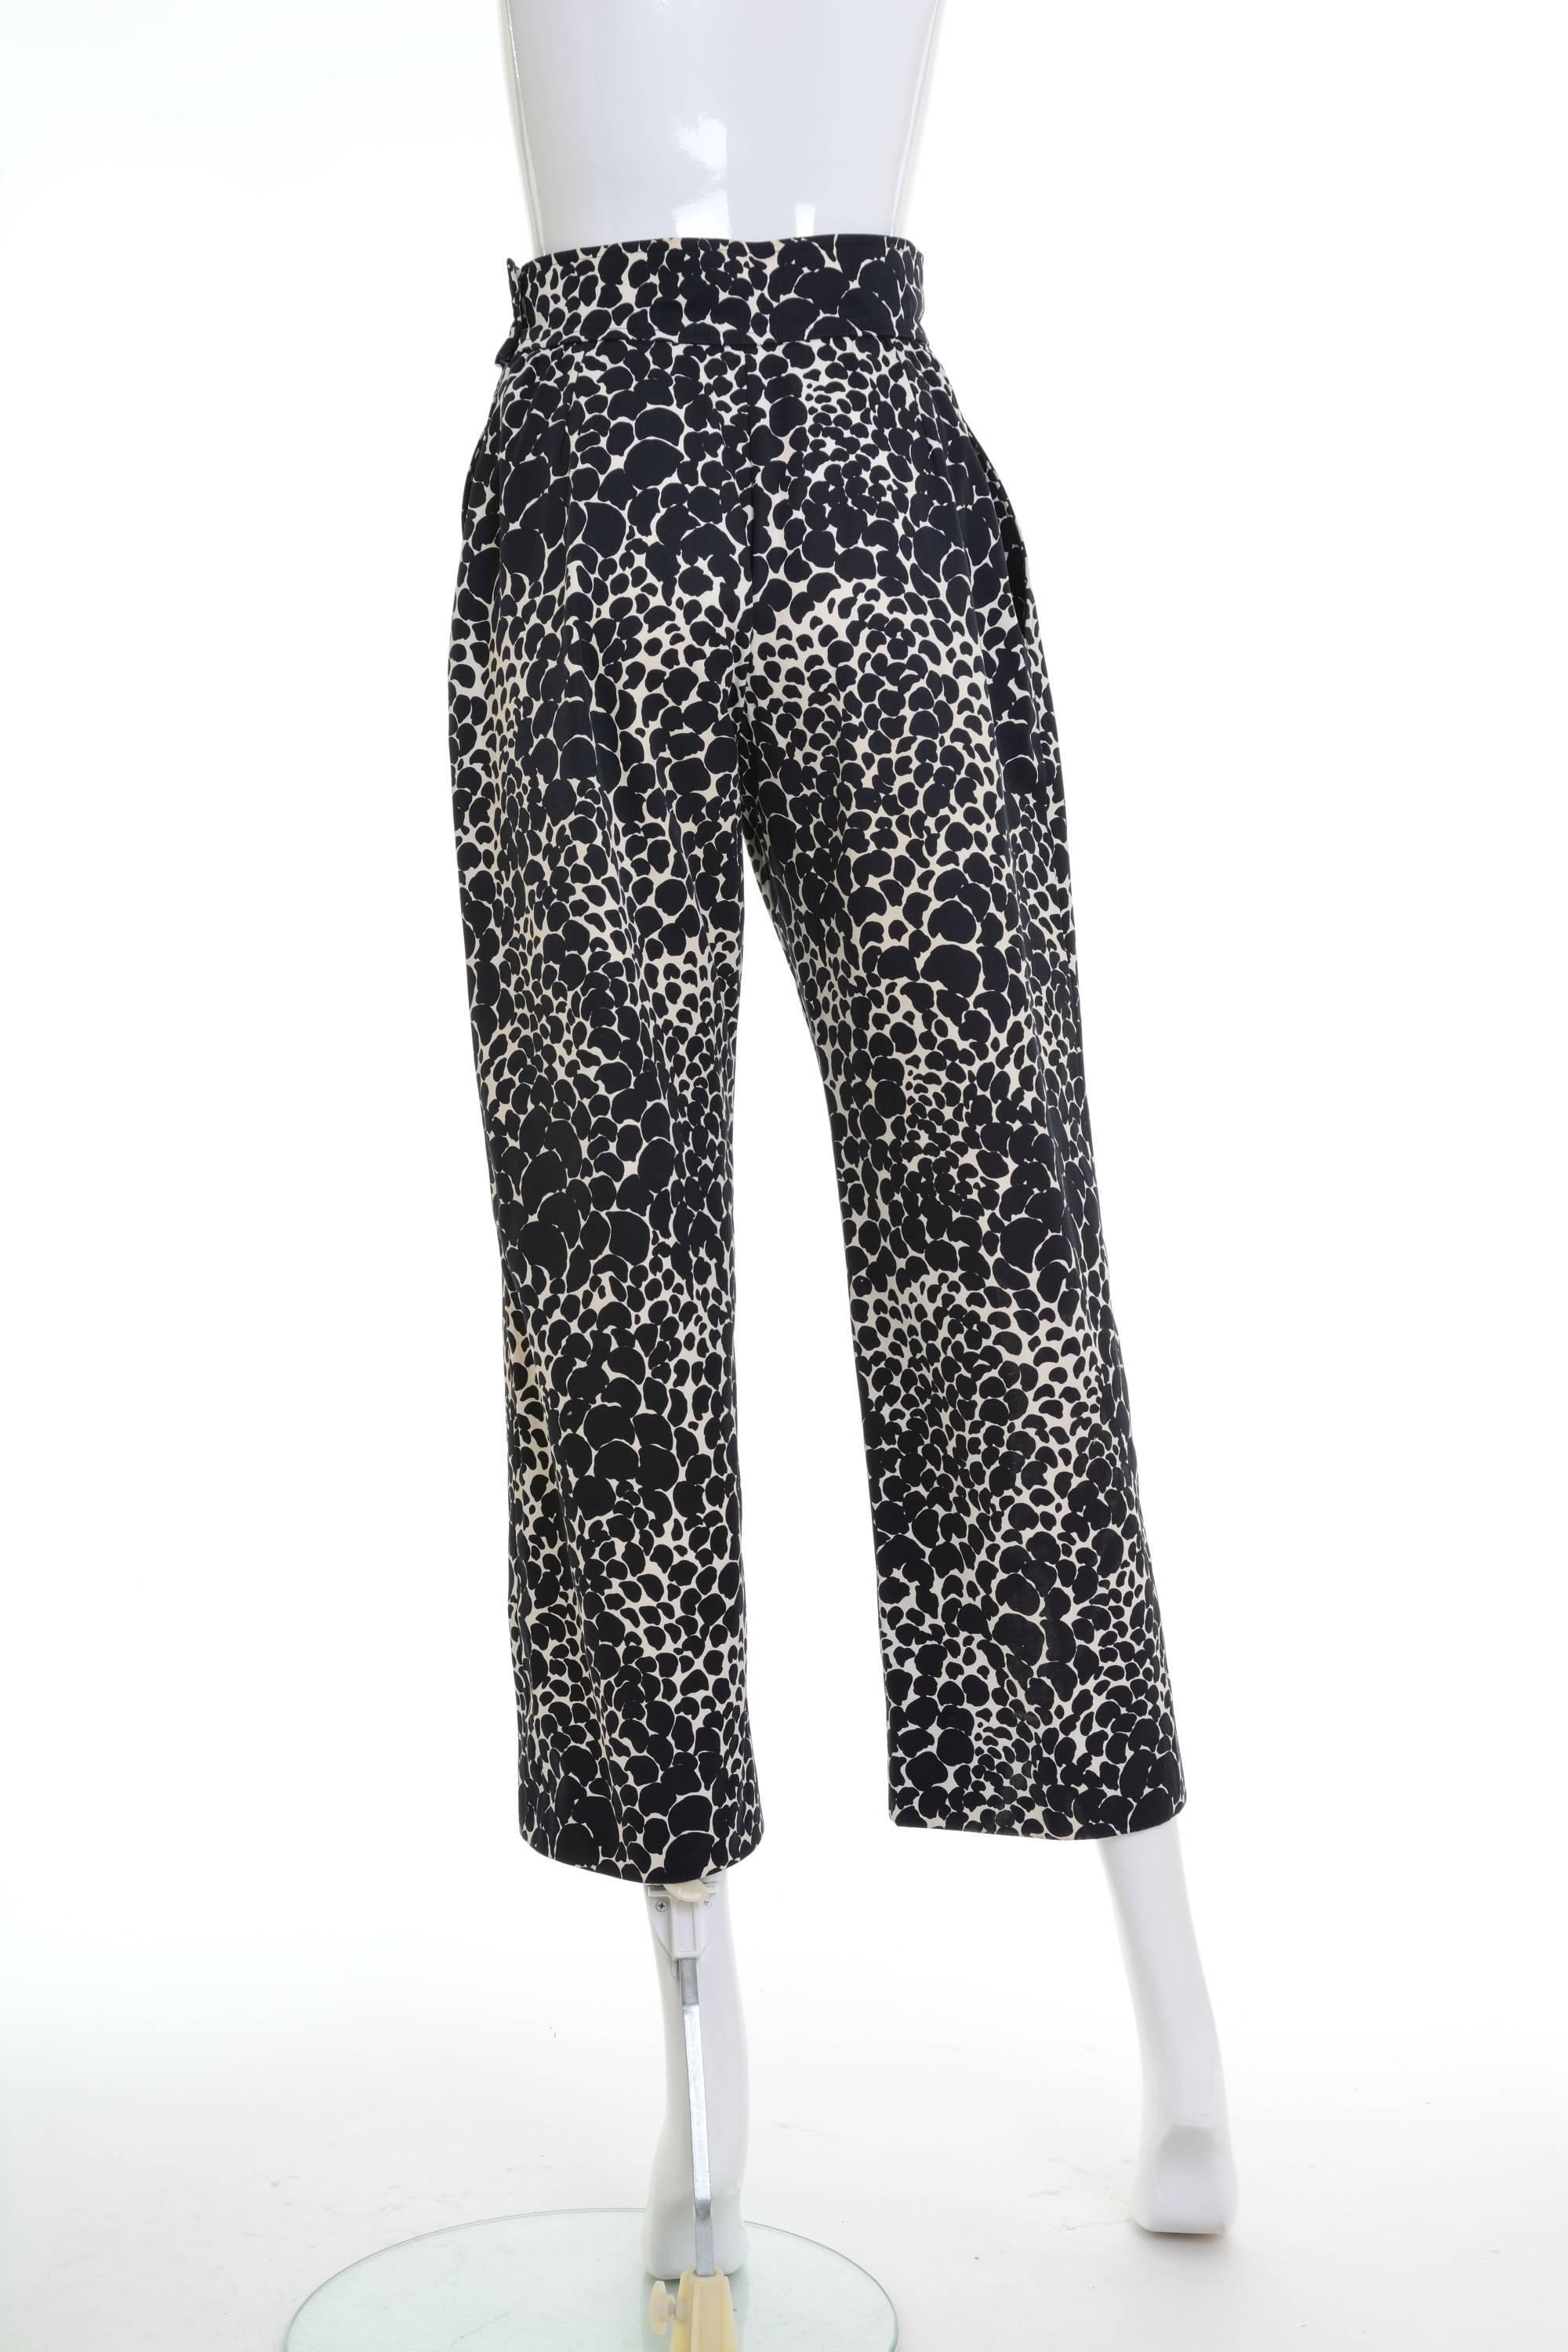 1980s Yves Saint Laurent Rive Gauche printed pants in a cotton fabric, ankle length, seam pockets, side zip closure with two buttons, with a lot of fabric in the hem to be able to stretch.

Excellent Vintage Condition

Label : Saint Laurent Rive